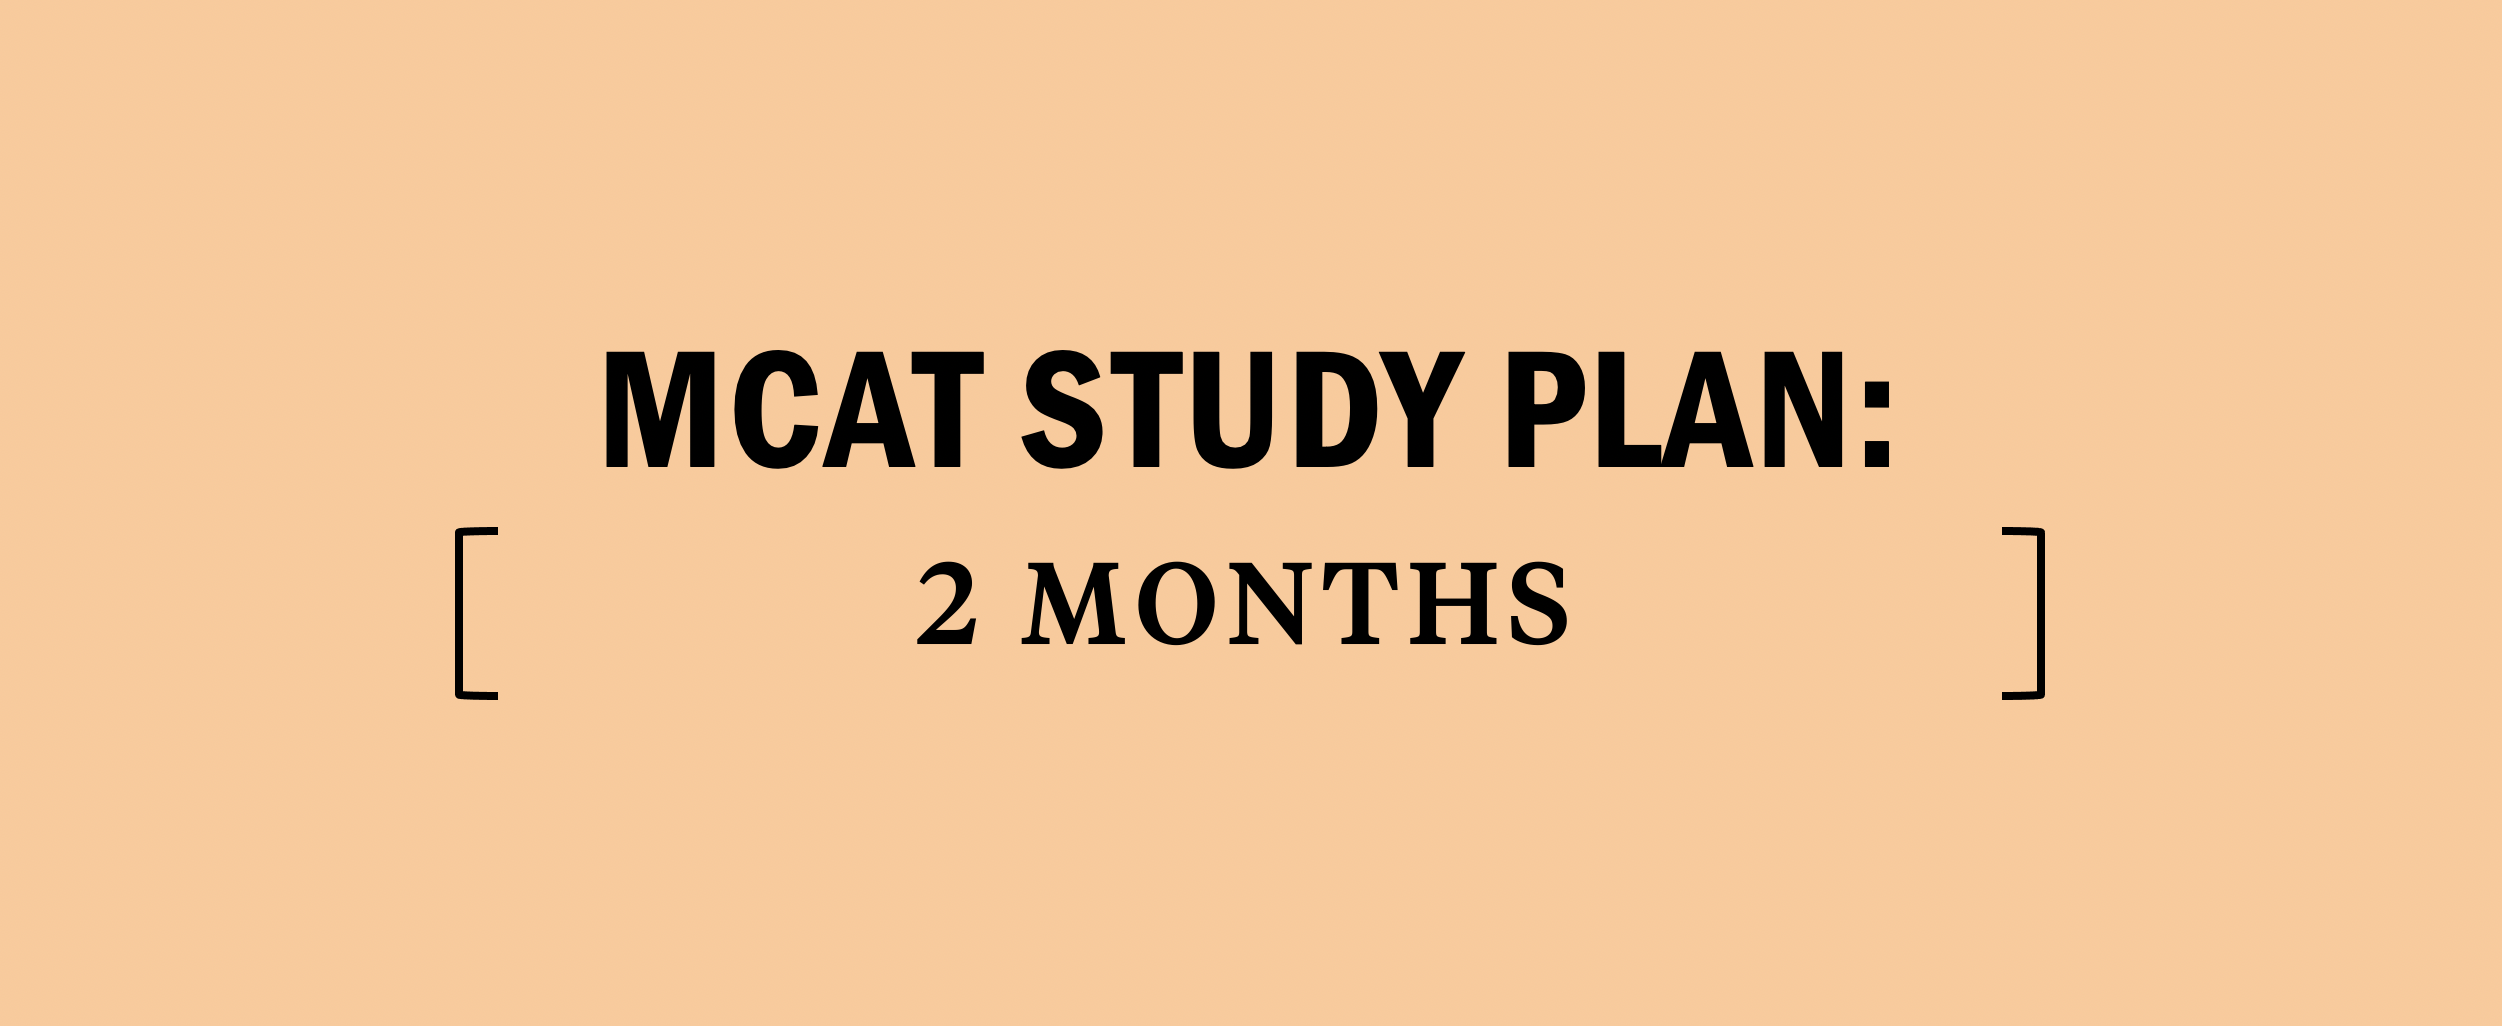 mcat-study-plan-2-two-month-months-how-to-prep-schedule-medical-school